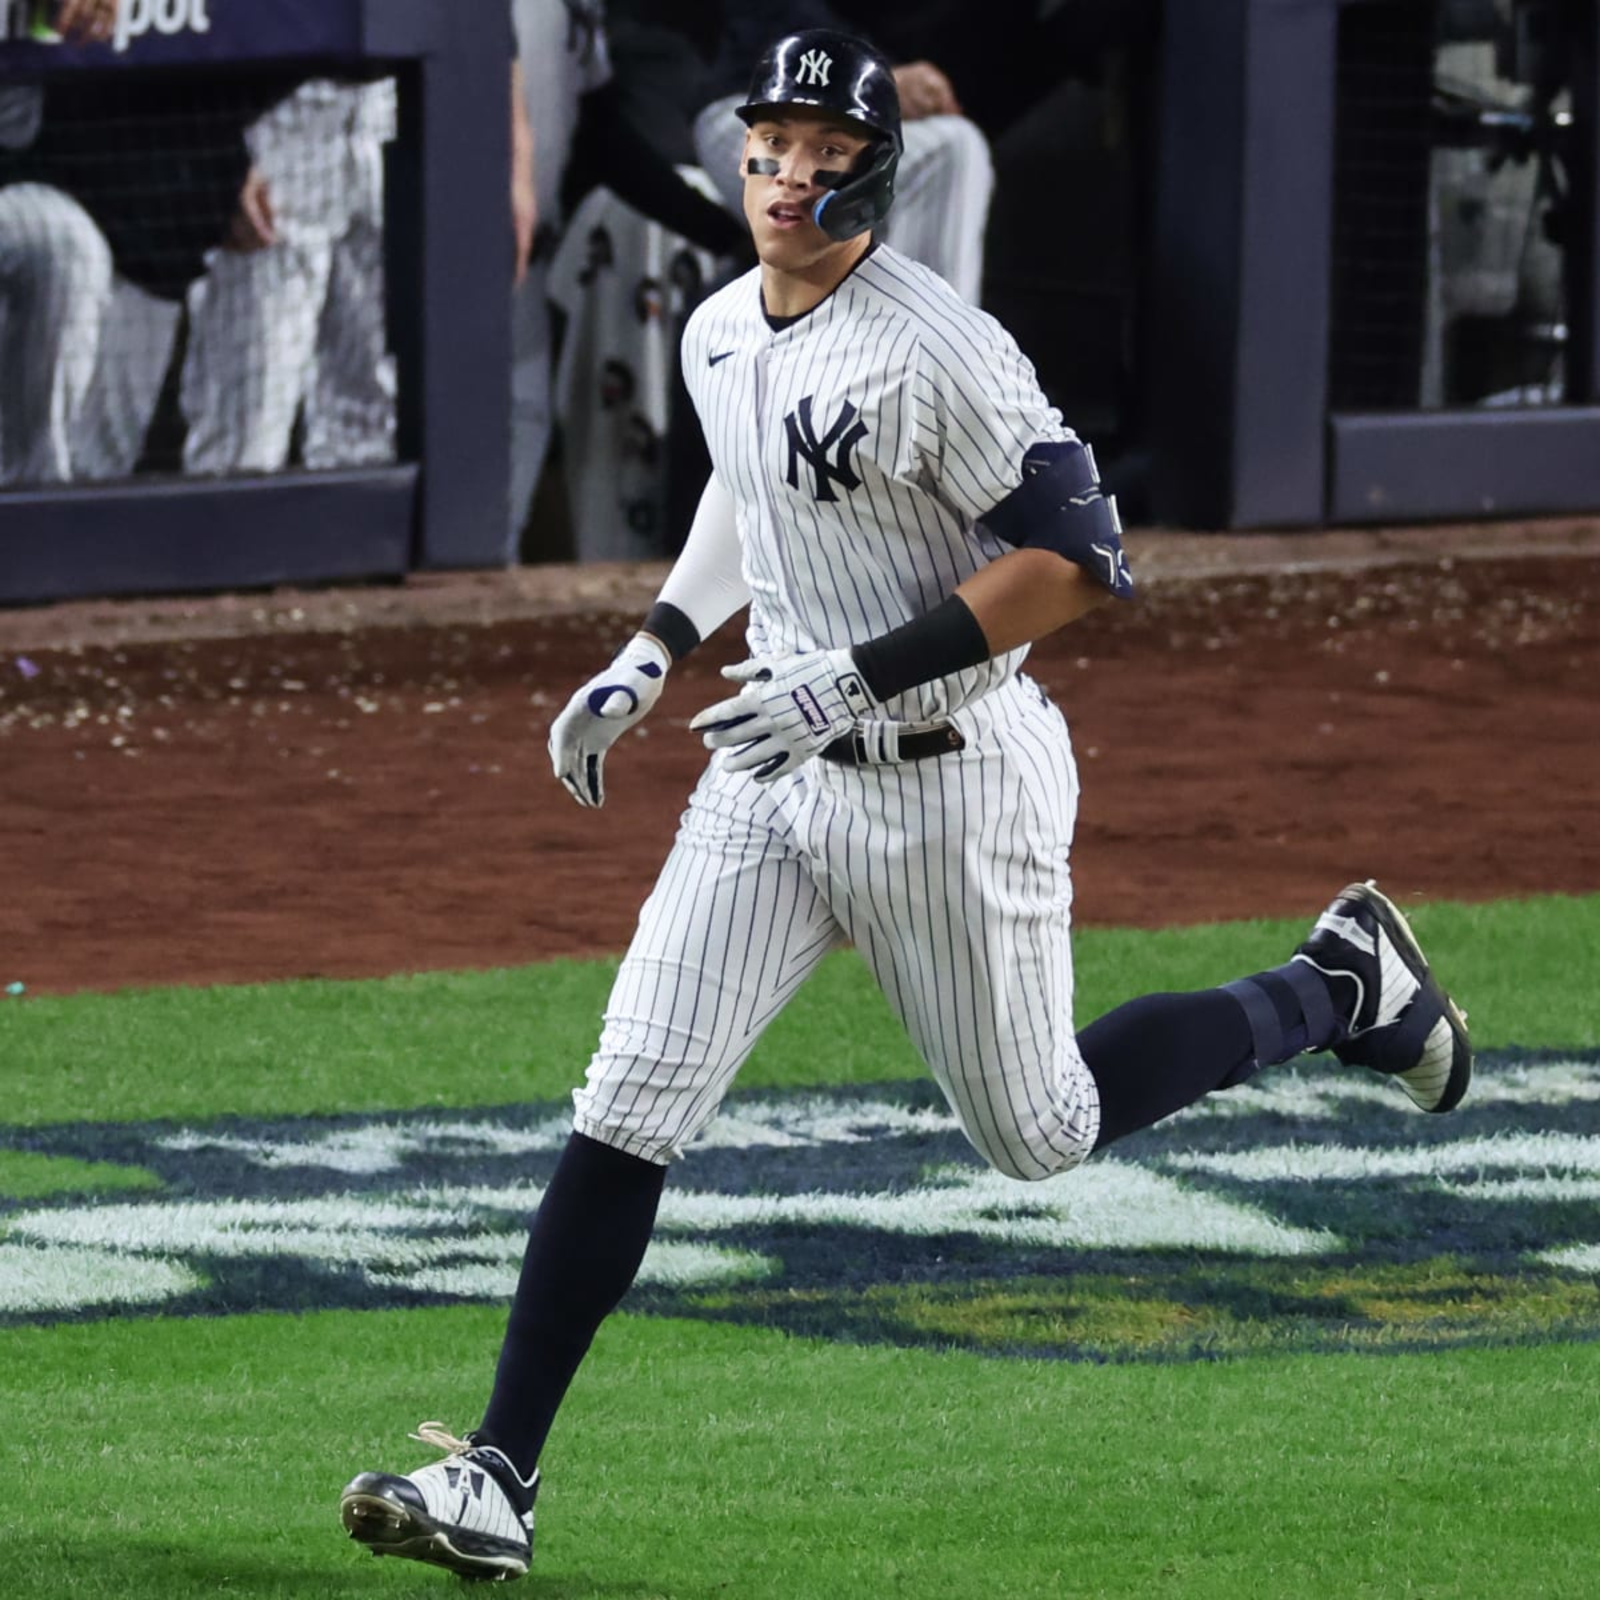 Buyer Beware: Aaron Judge Signing with Giants Would Be Big Mistake